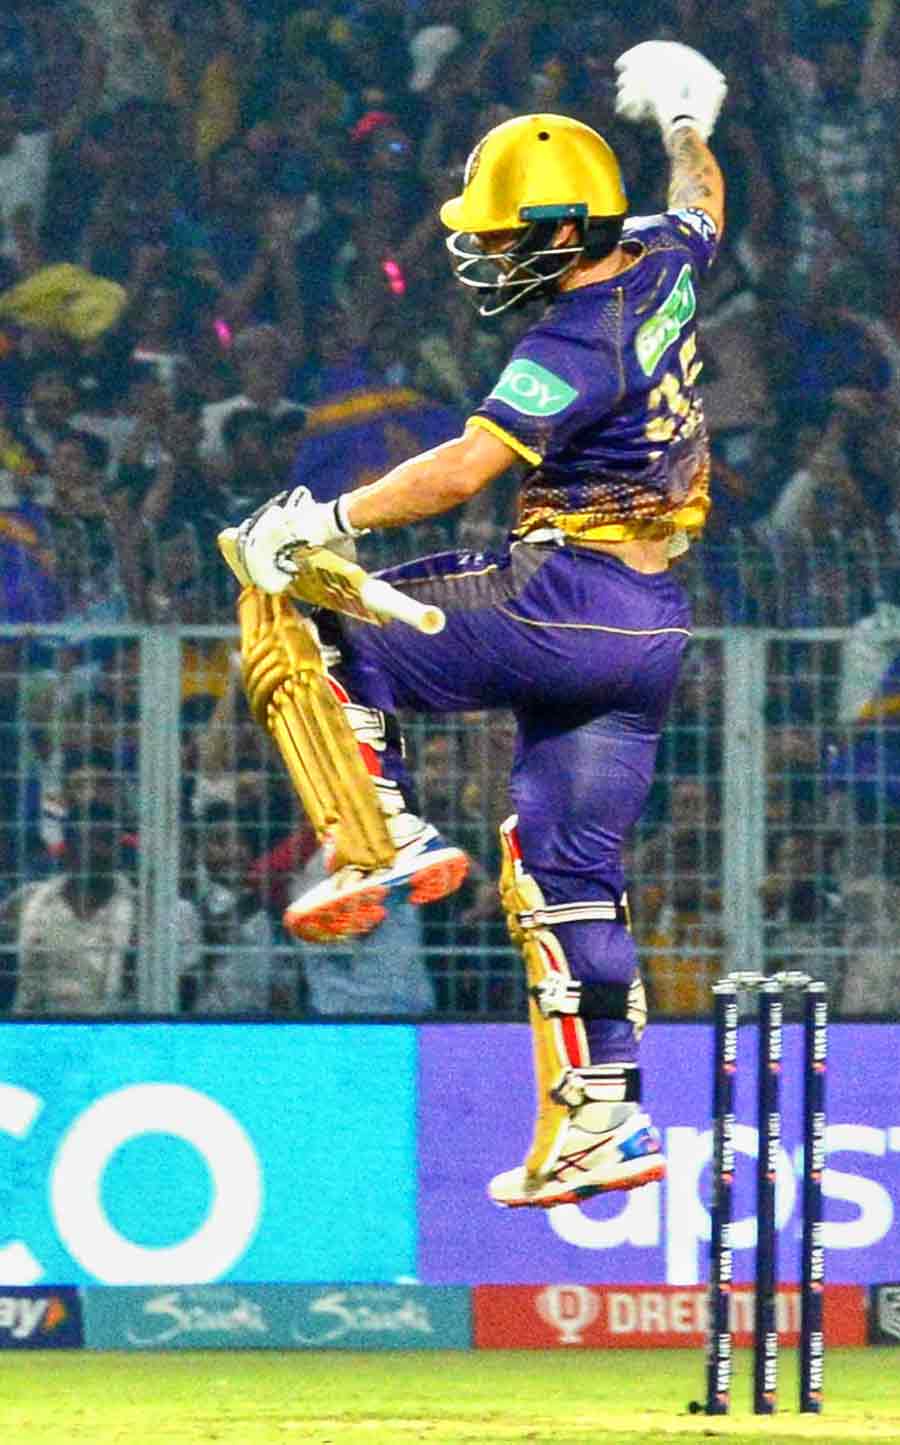 Kolkata Knight Riders defeated Punjab Kings in a nail-biting finish. KKR’s Rinku Singh finished off in style as KKR romped home in the last ball. Set to score 180 to win, KKR won by five wickets. Rinku Singh is seen celebrating after the win. Rinku remained unbeaten on 21 in 10 deliveries. He hit two boundaries and a six